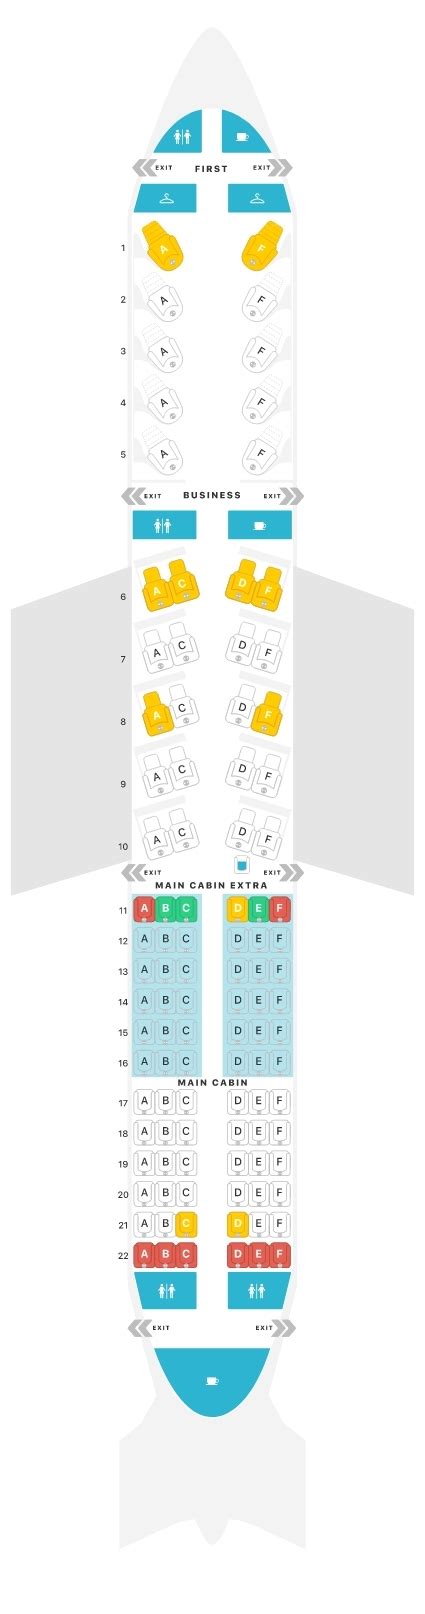 Airbus Industrie A Sharklets American Airlines Seating Chart